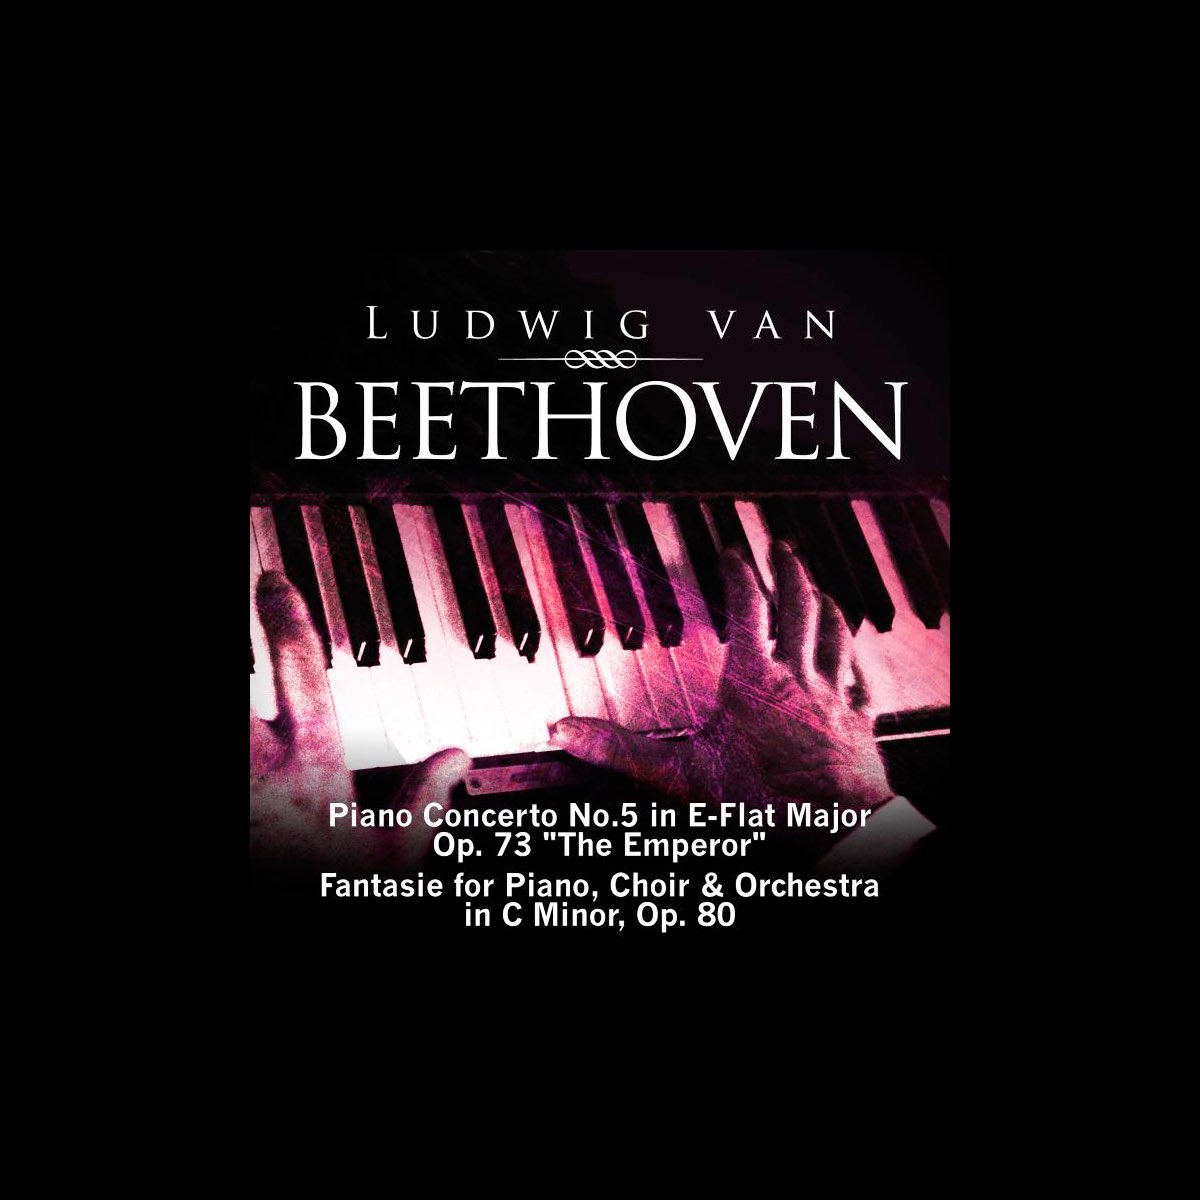 Beethoven: Piano Concerto No. 5 in E-Flat Major, Op. 73 "The Emperor" &  Fantasie for Piano, Choir & Orchestra in C Minor, Op. 80 by Various Artists  on Apple Music